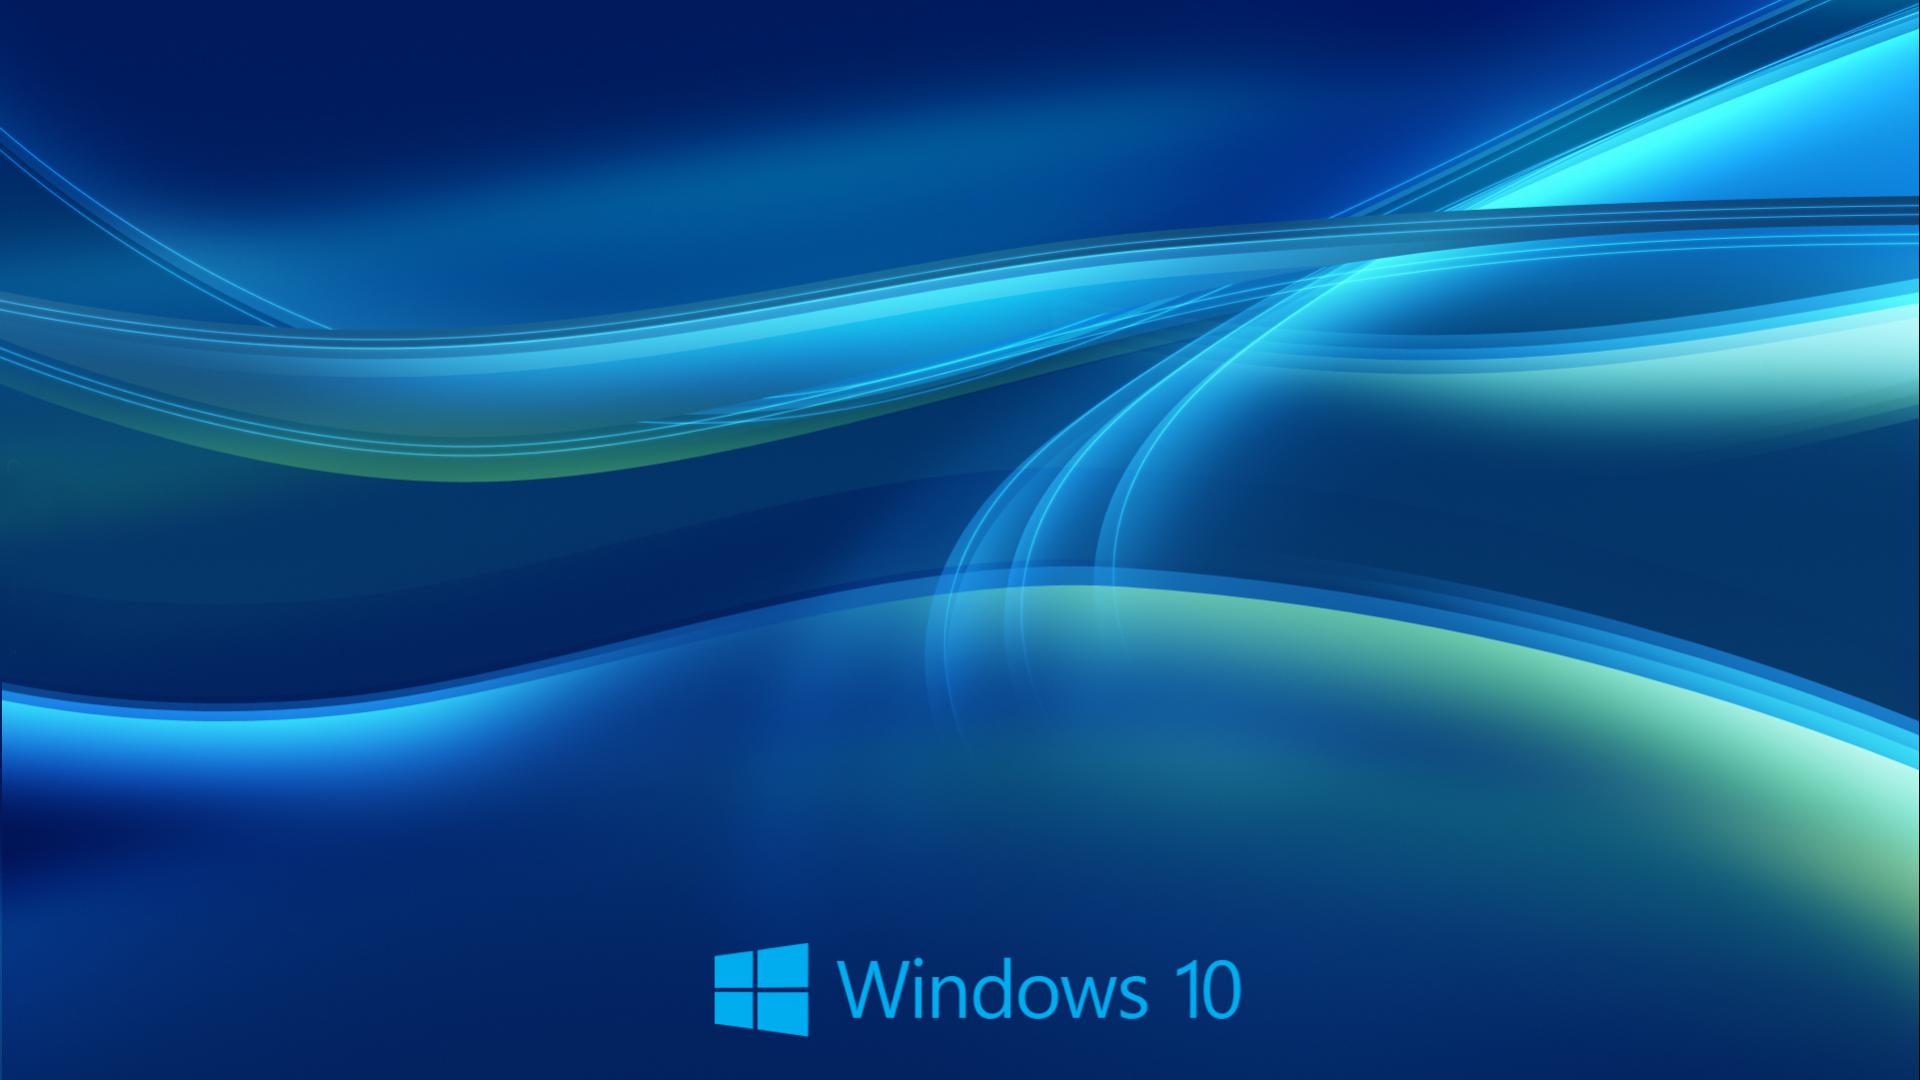 Windows Wallpaper HD In Blue Abstract With New Logo